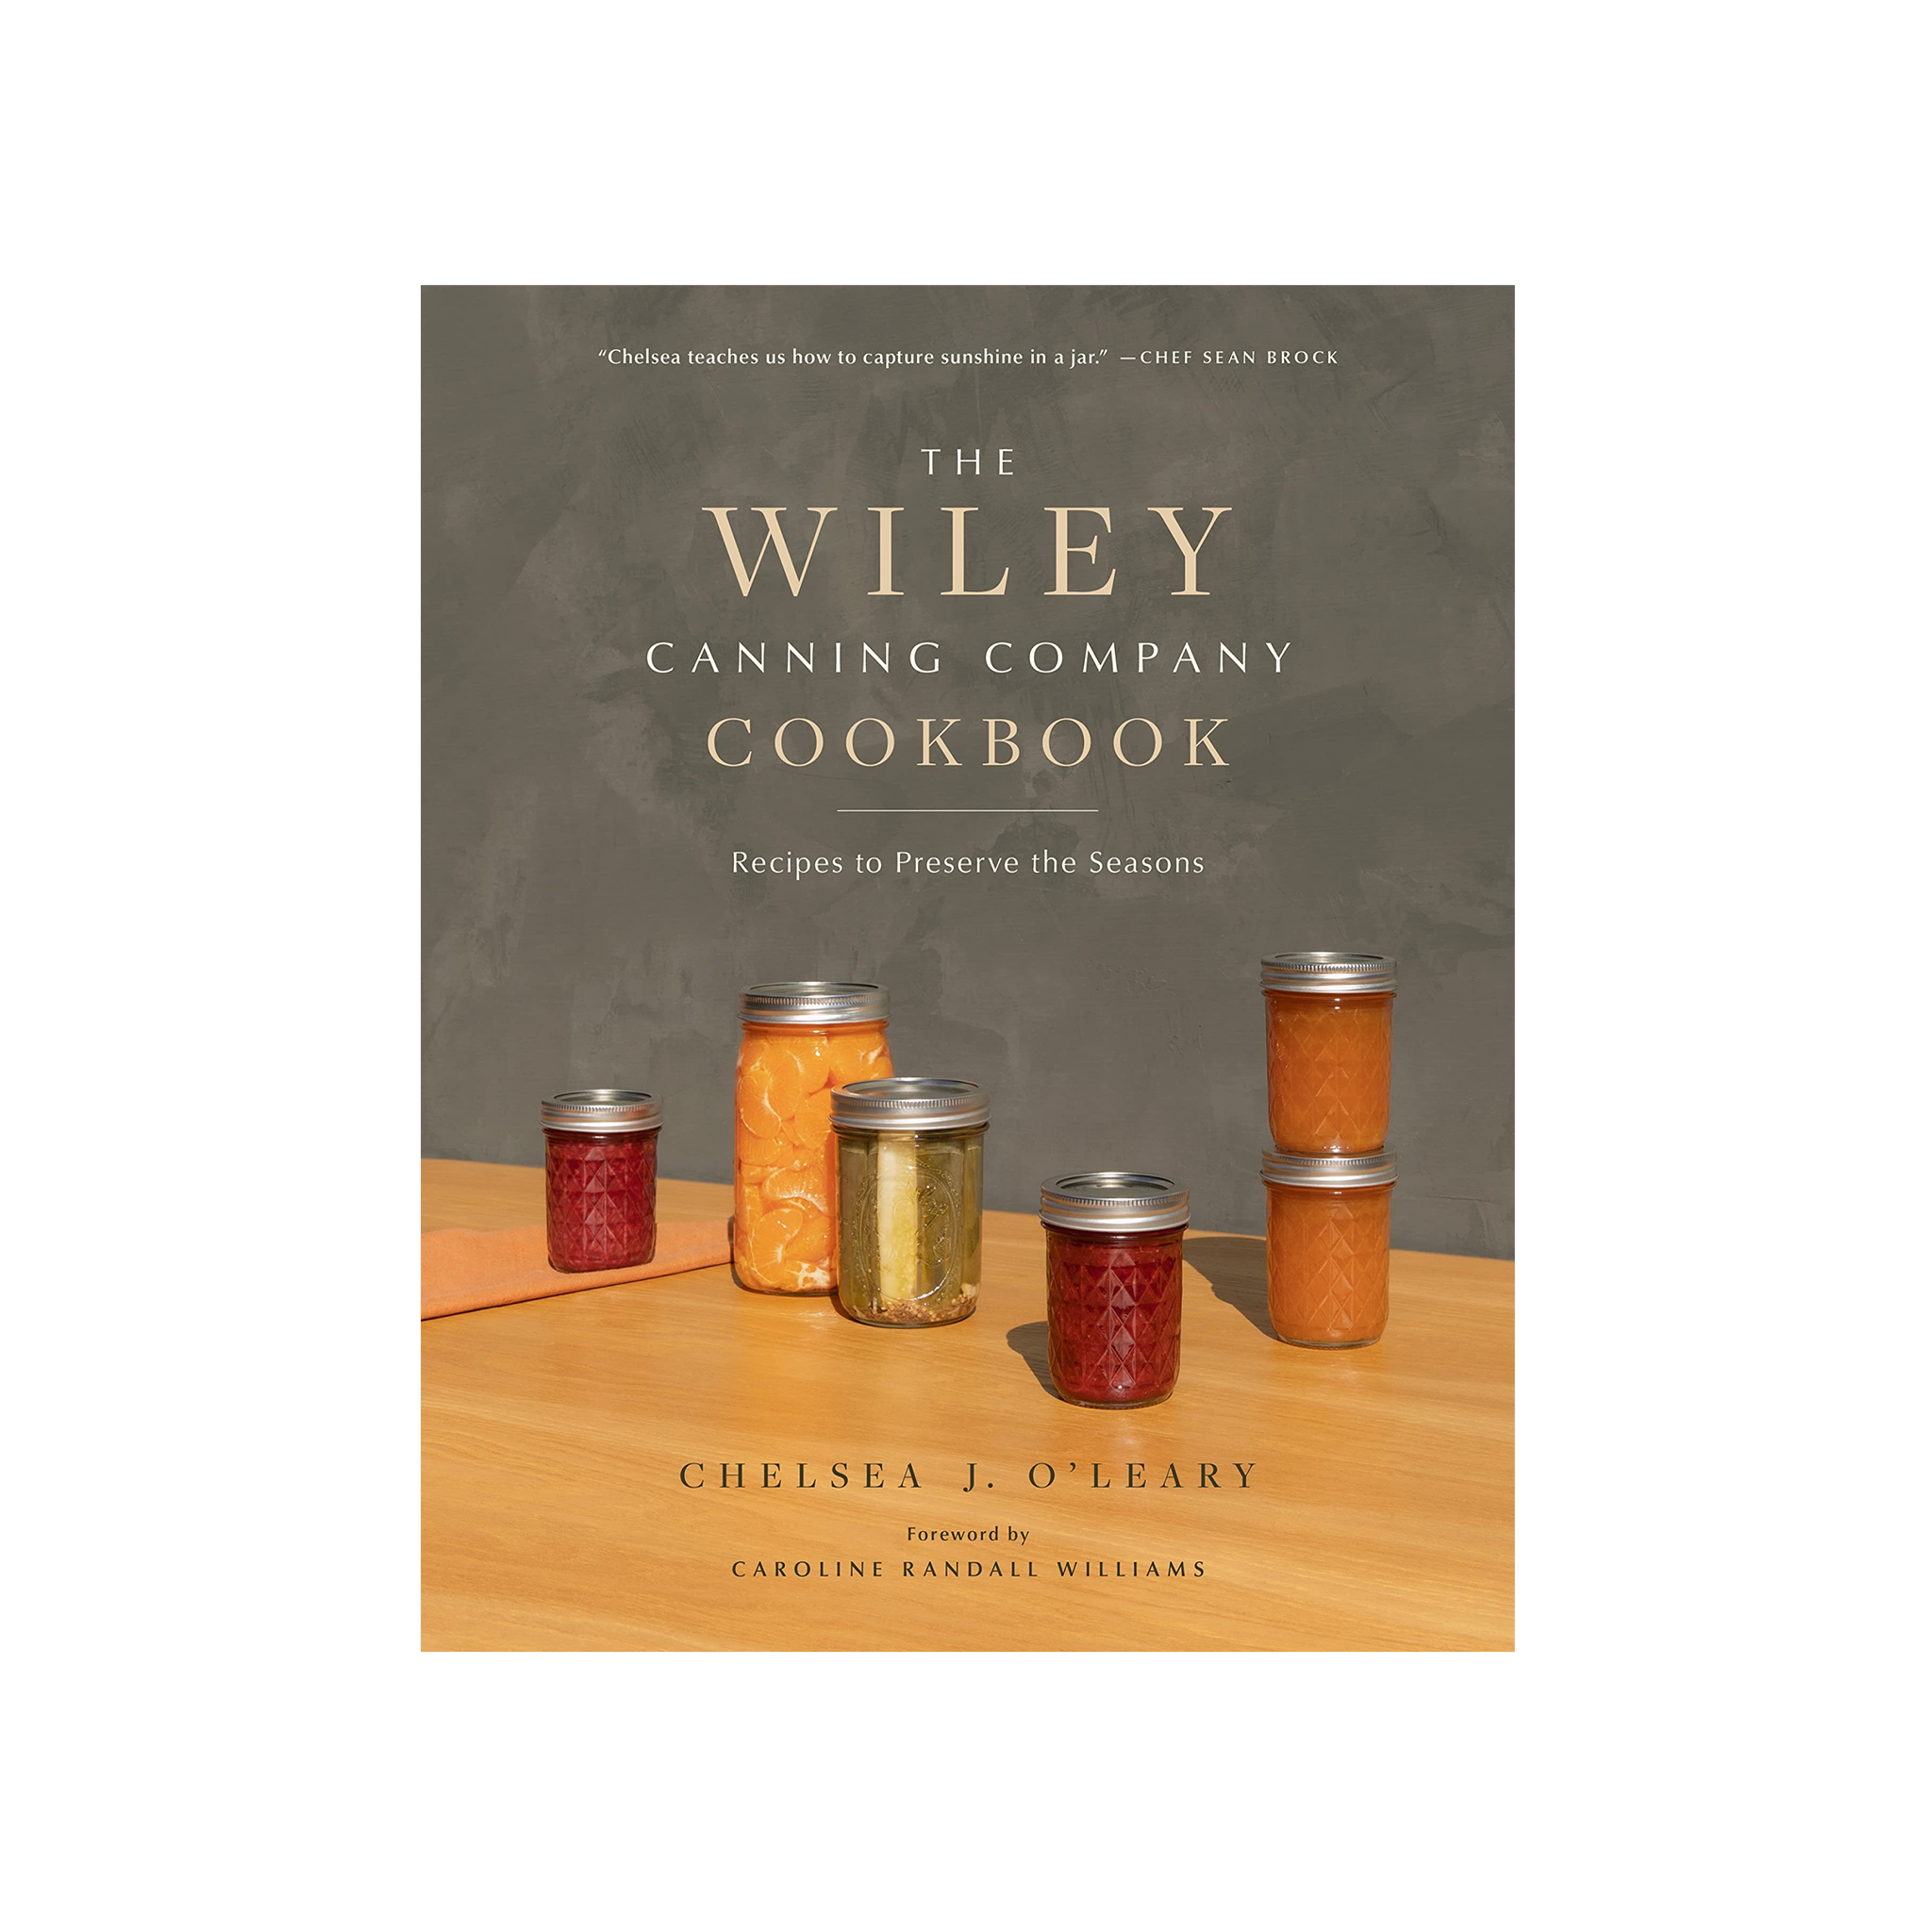 The Wiley Canning Company Cookbook